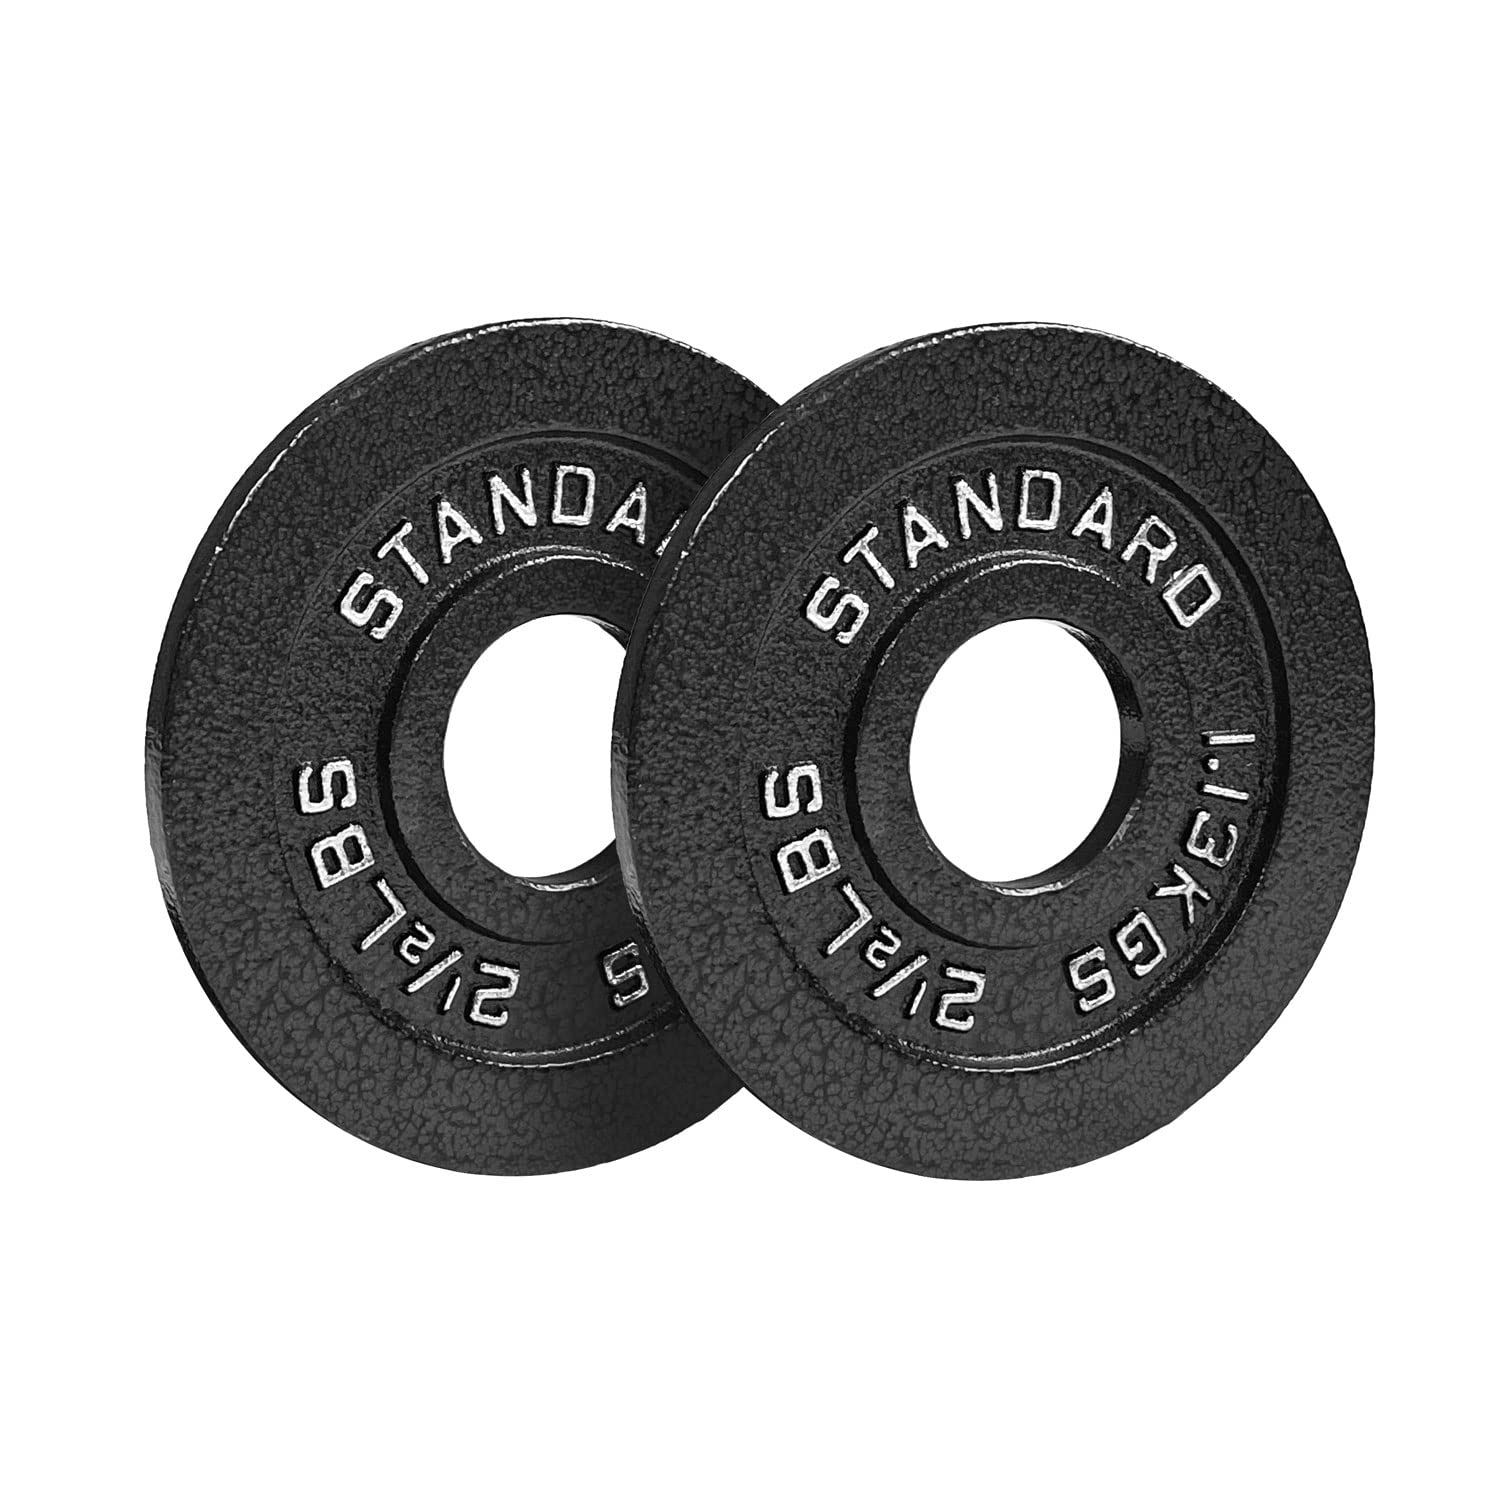 Steel Weight Plates 85LB Set - Olympic 2 inch Center Premium Coating 2x 25lb, 10lb, 5lb, and 2.5lb for Olympic Weight Lifting Barbells